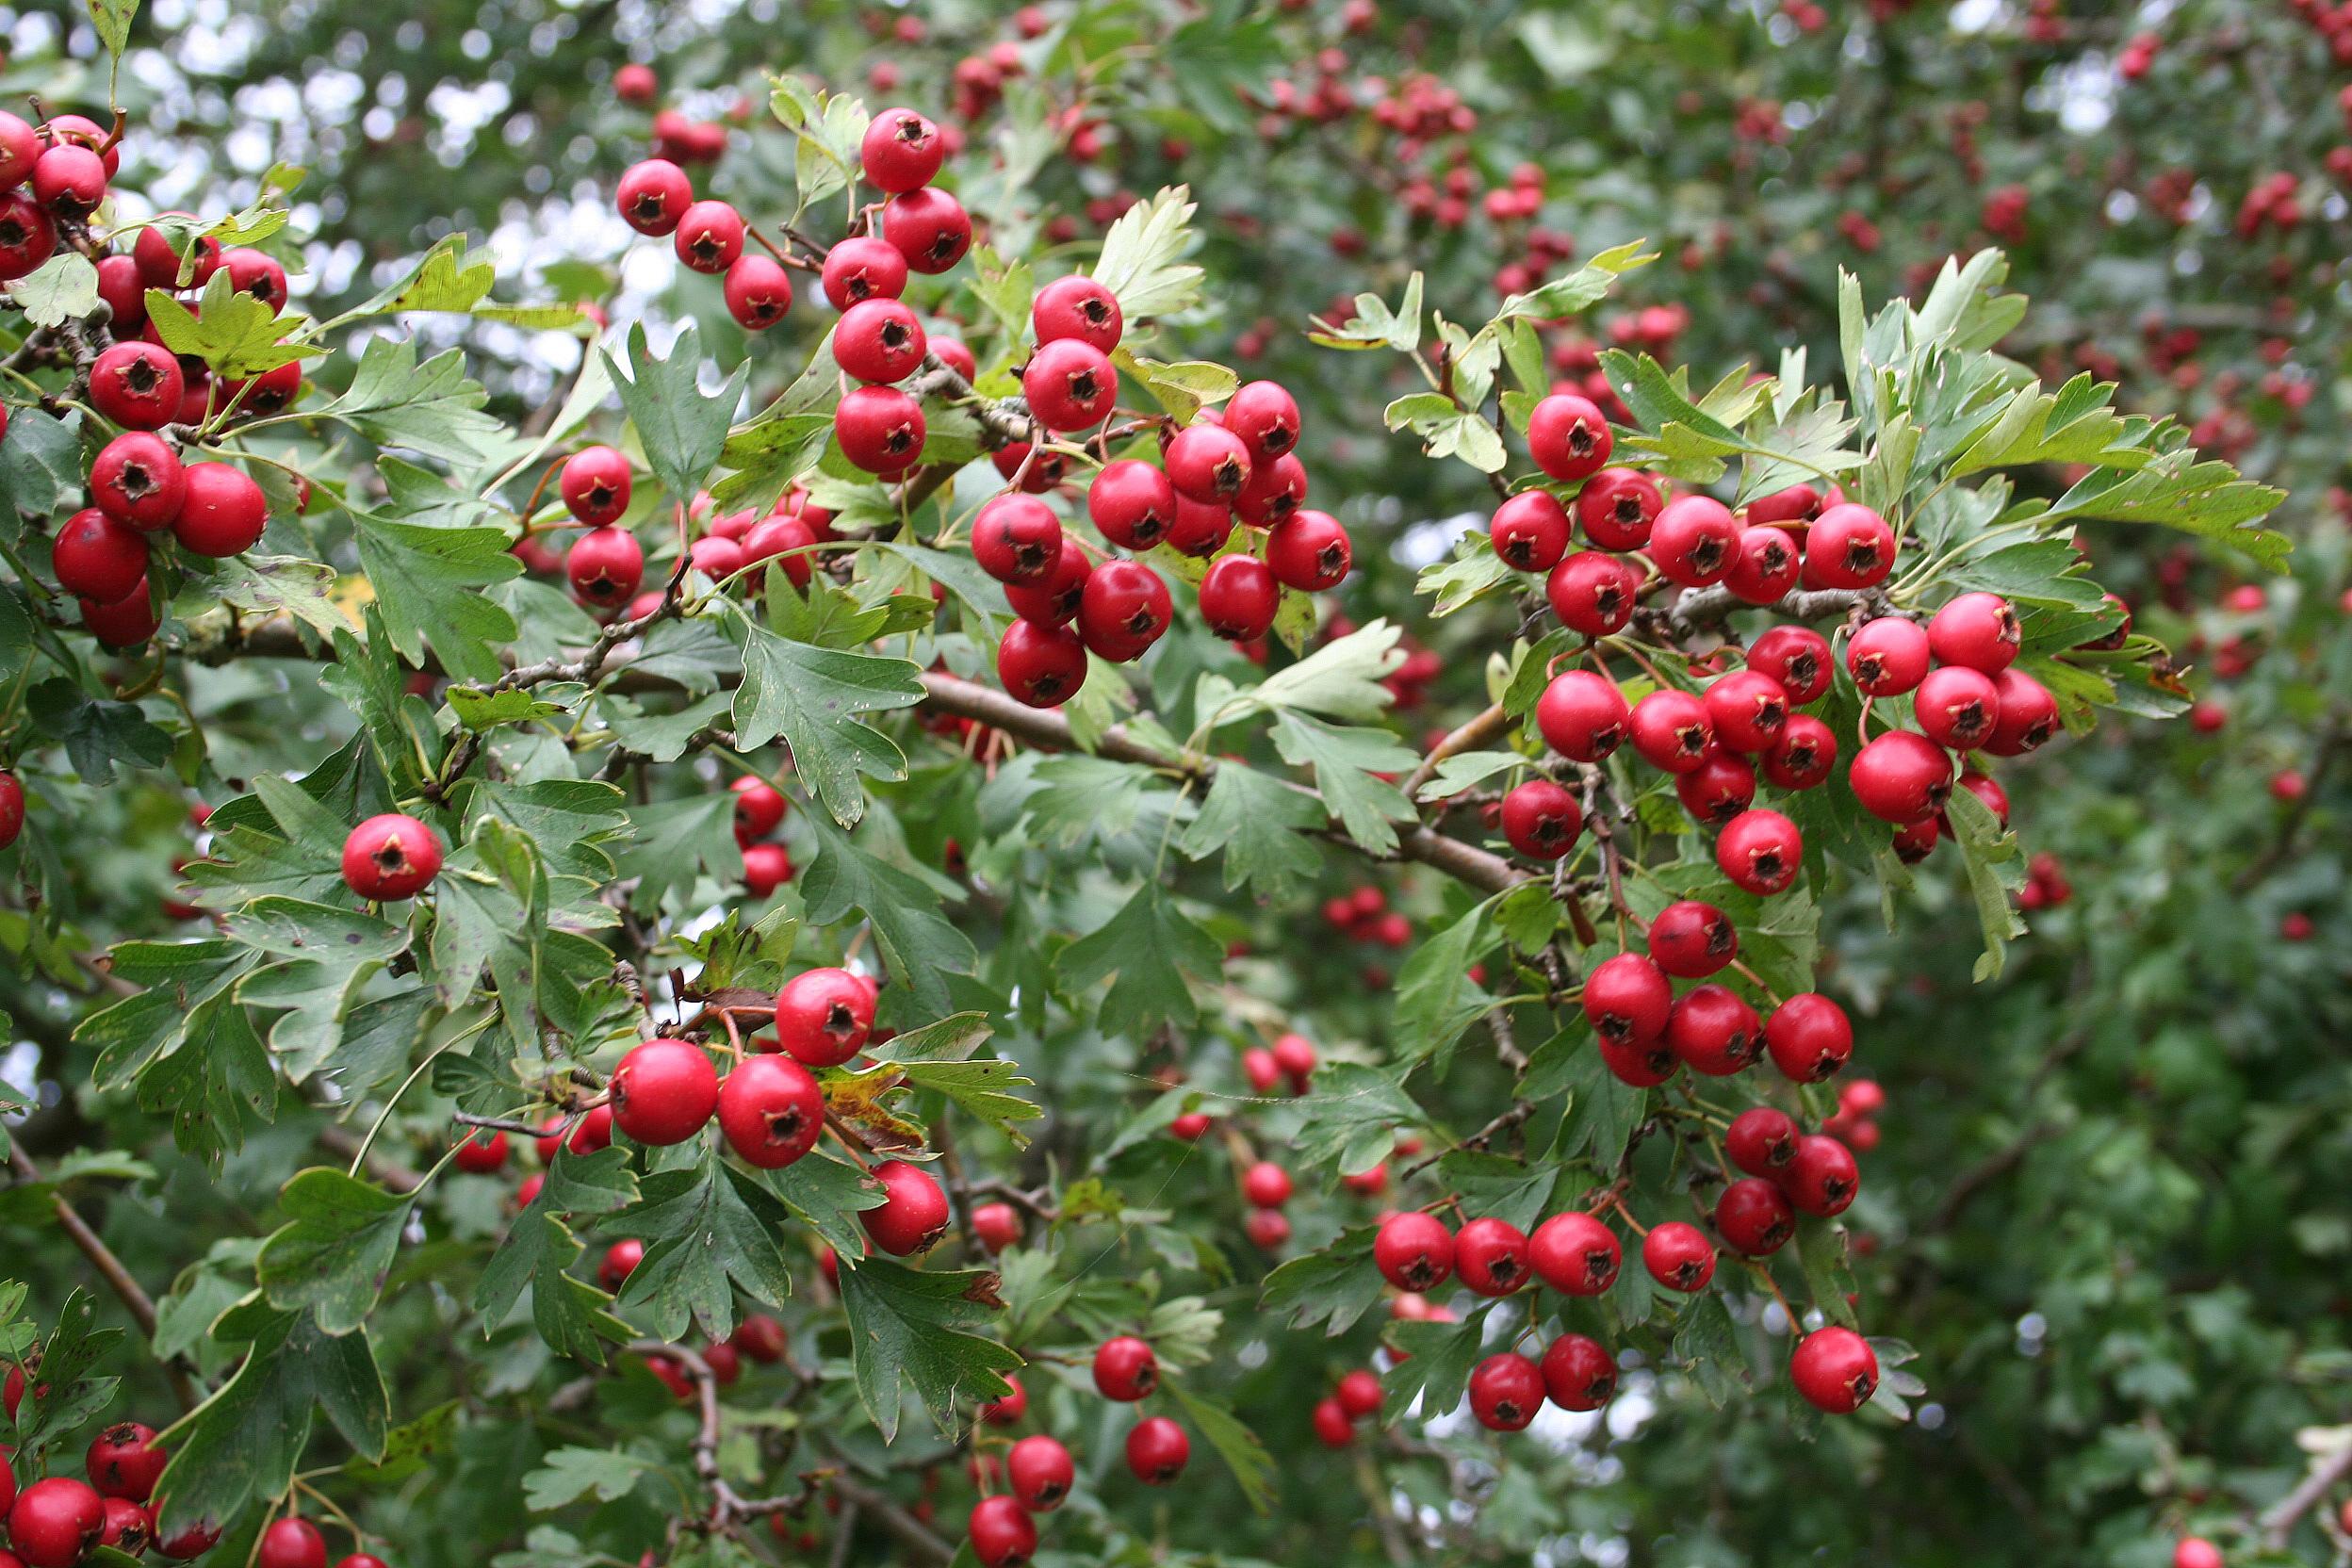 red-black fruits with green leaves, stems and brown branches